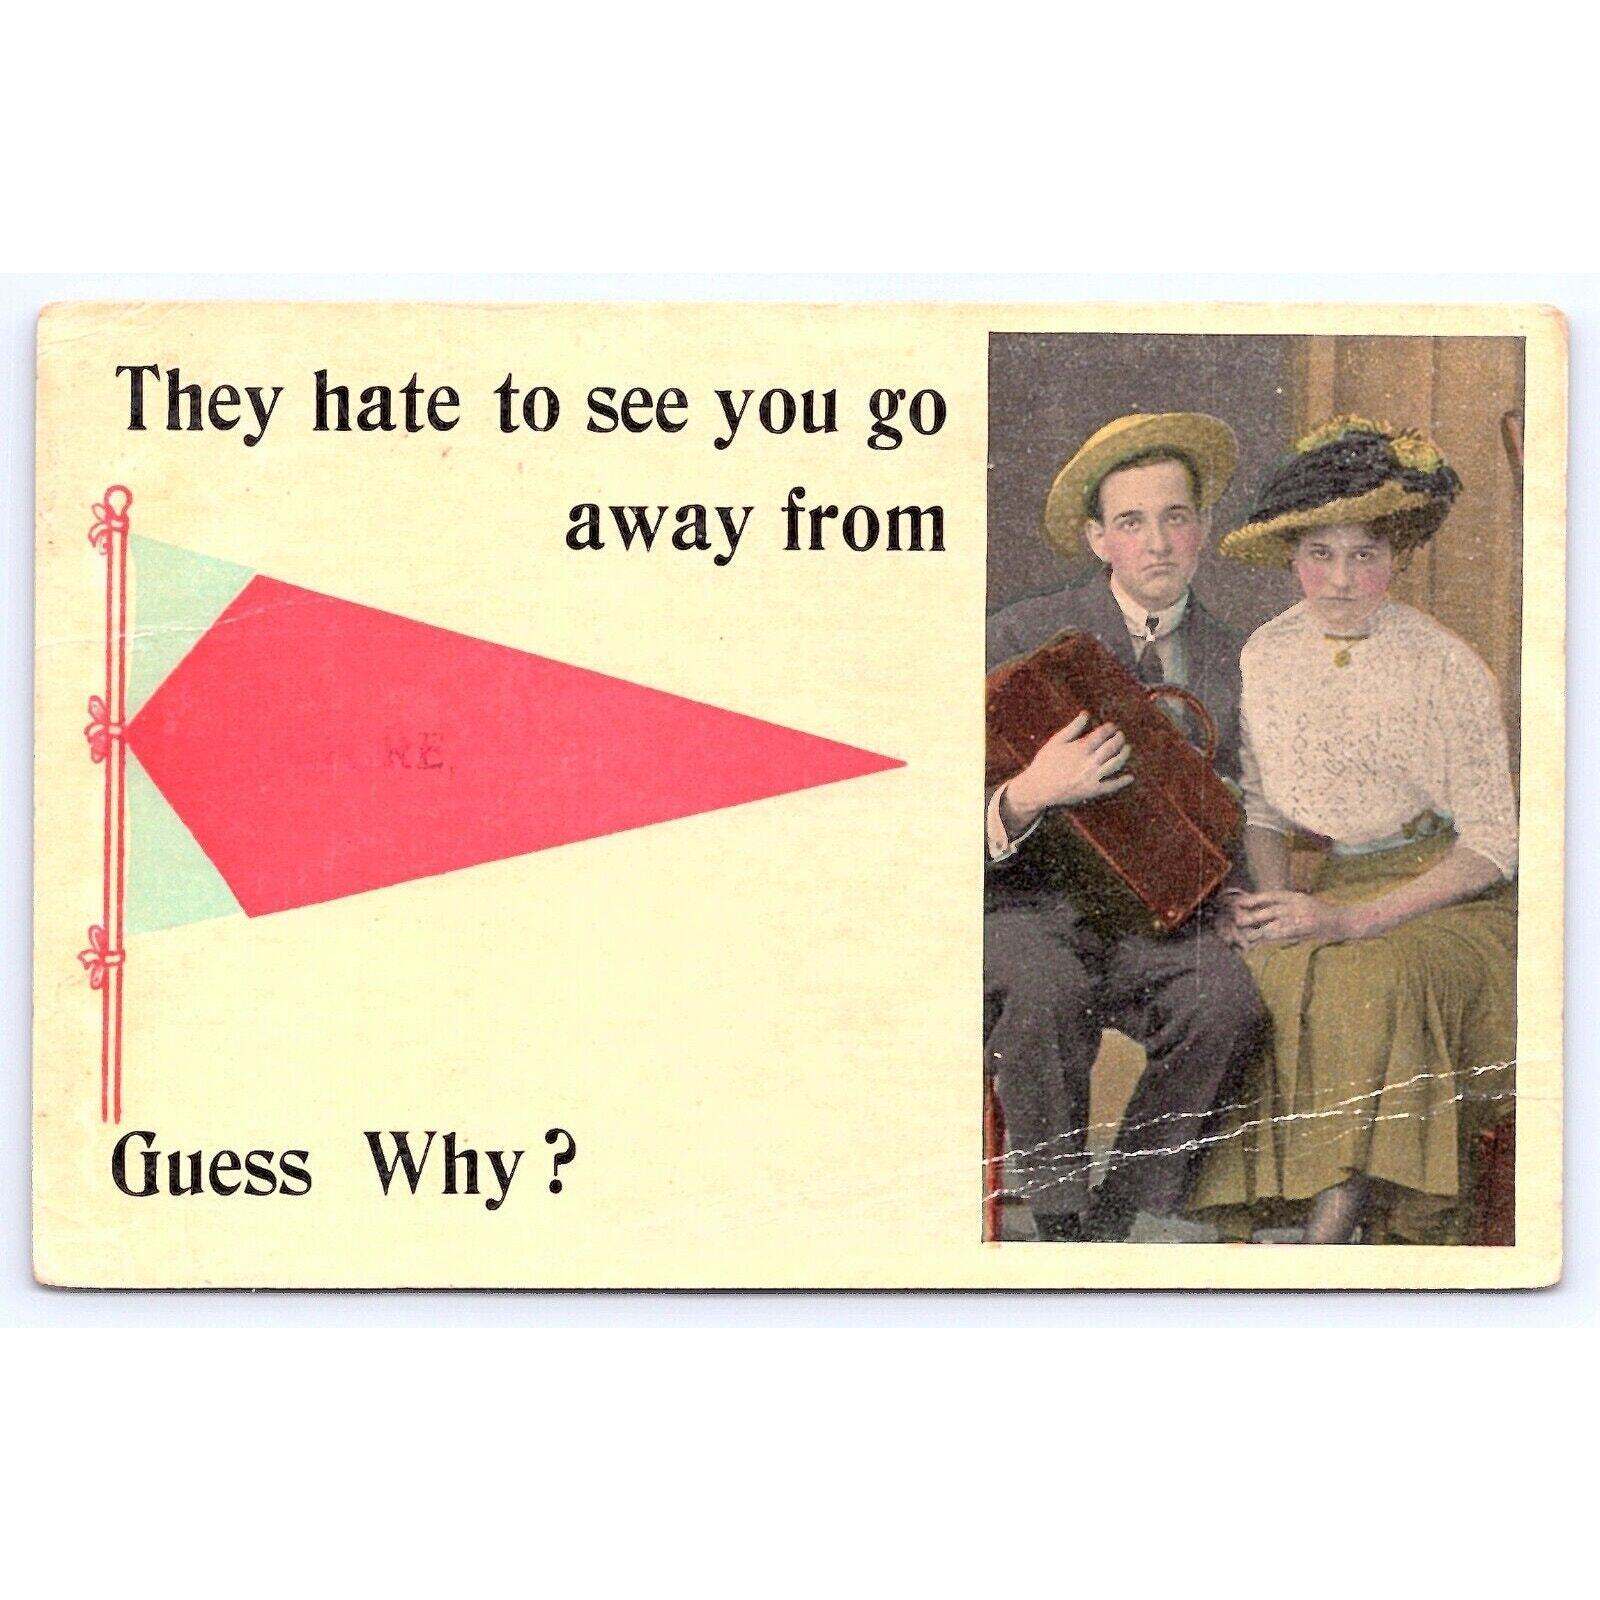 1914 They Hate to See You Go Away from Rumore Minnesota Guess Why Postcard 01228